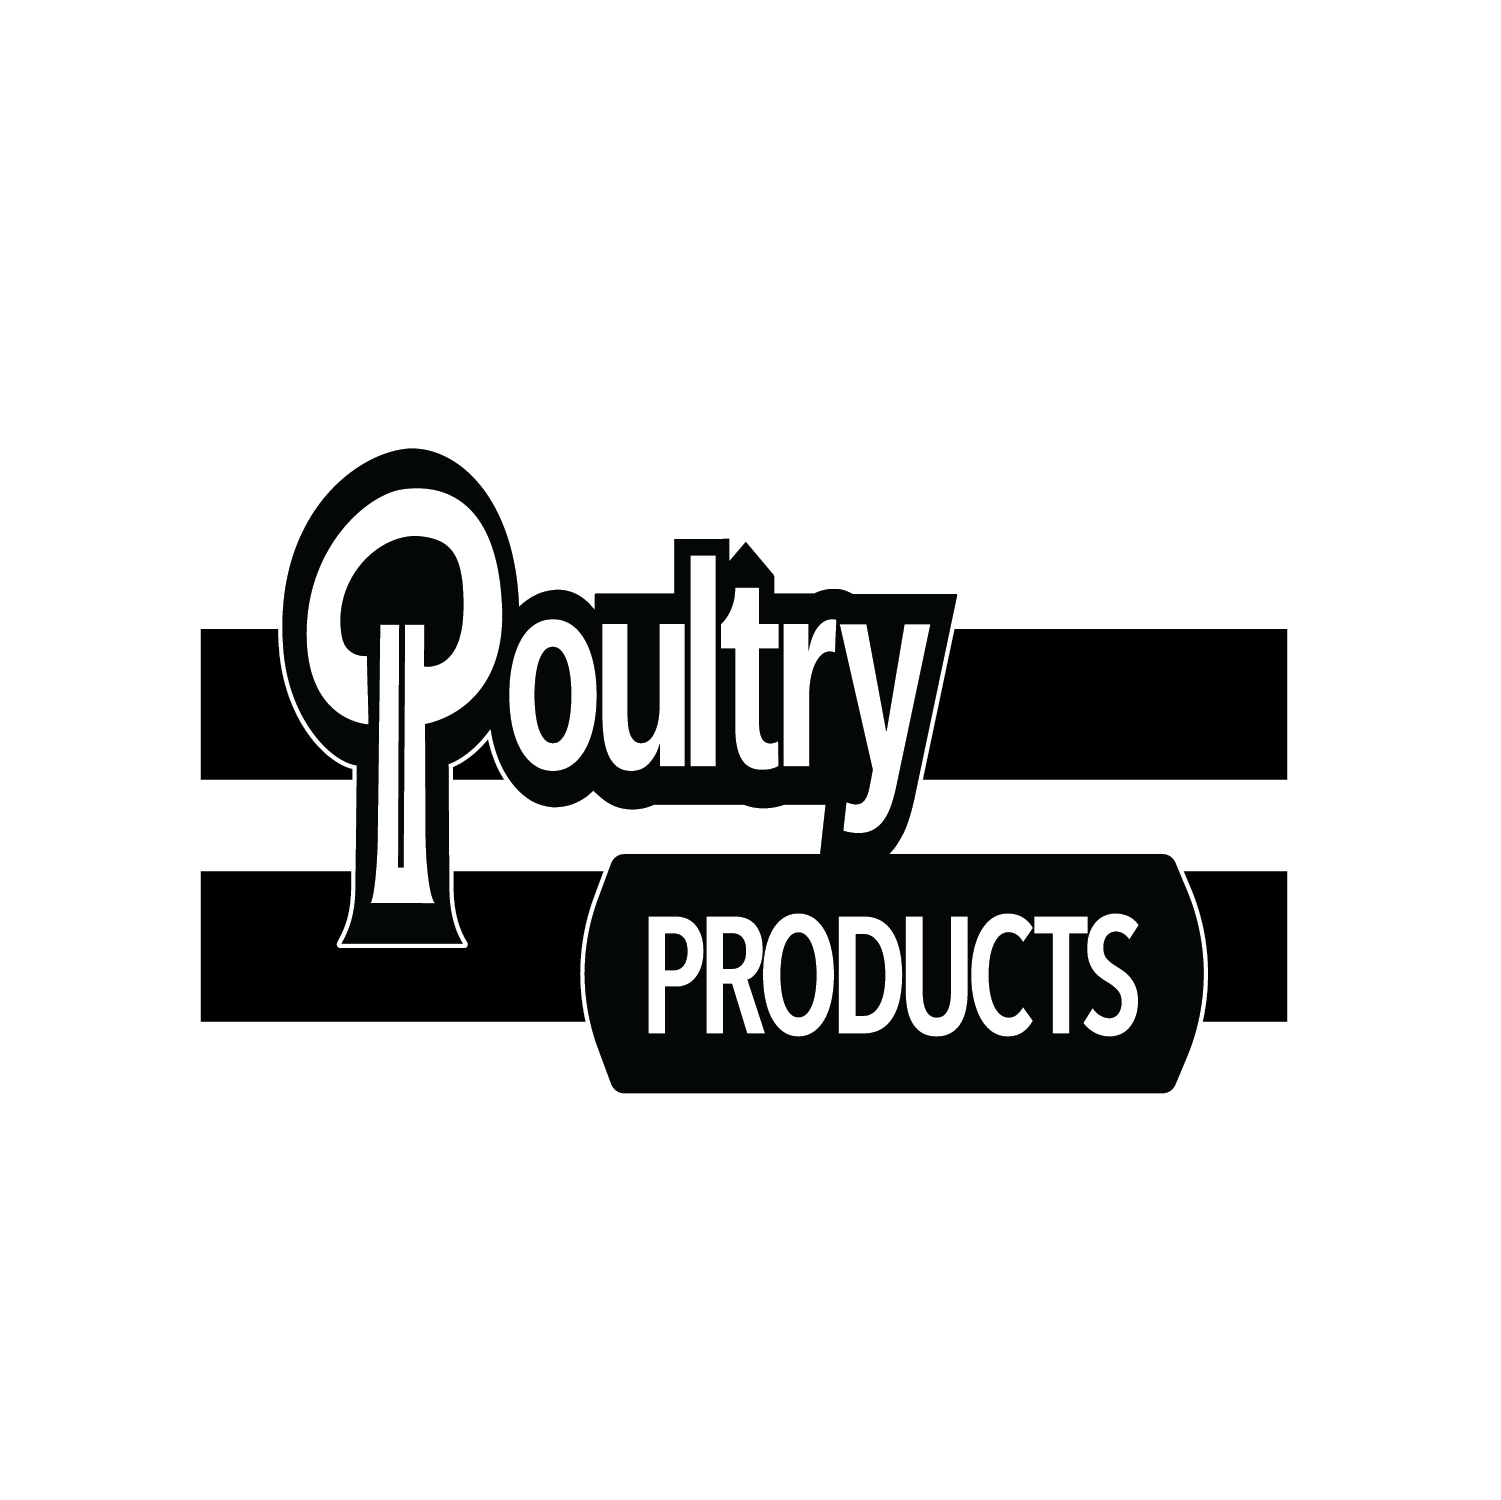 PPNE logo - Poultry Products Northeast